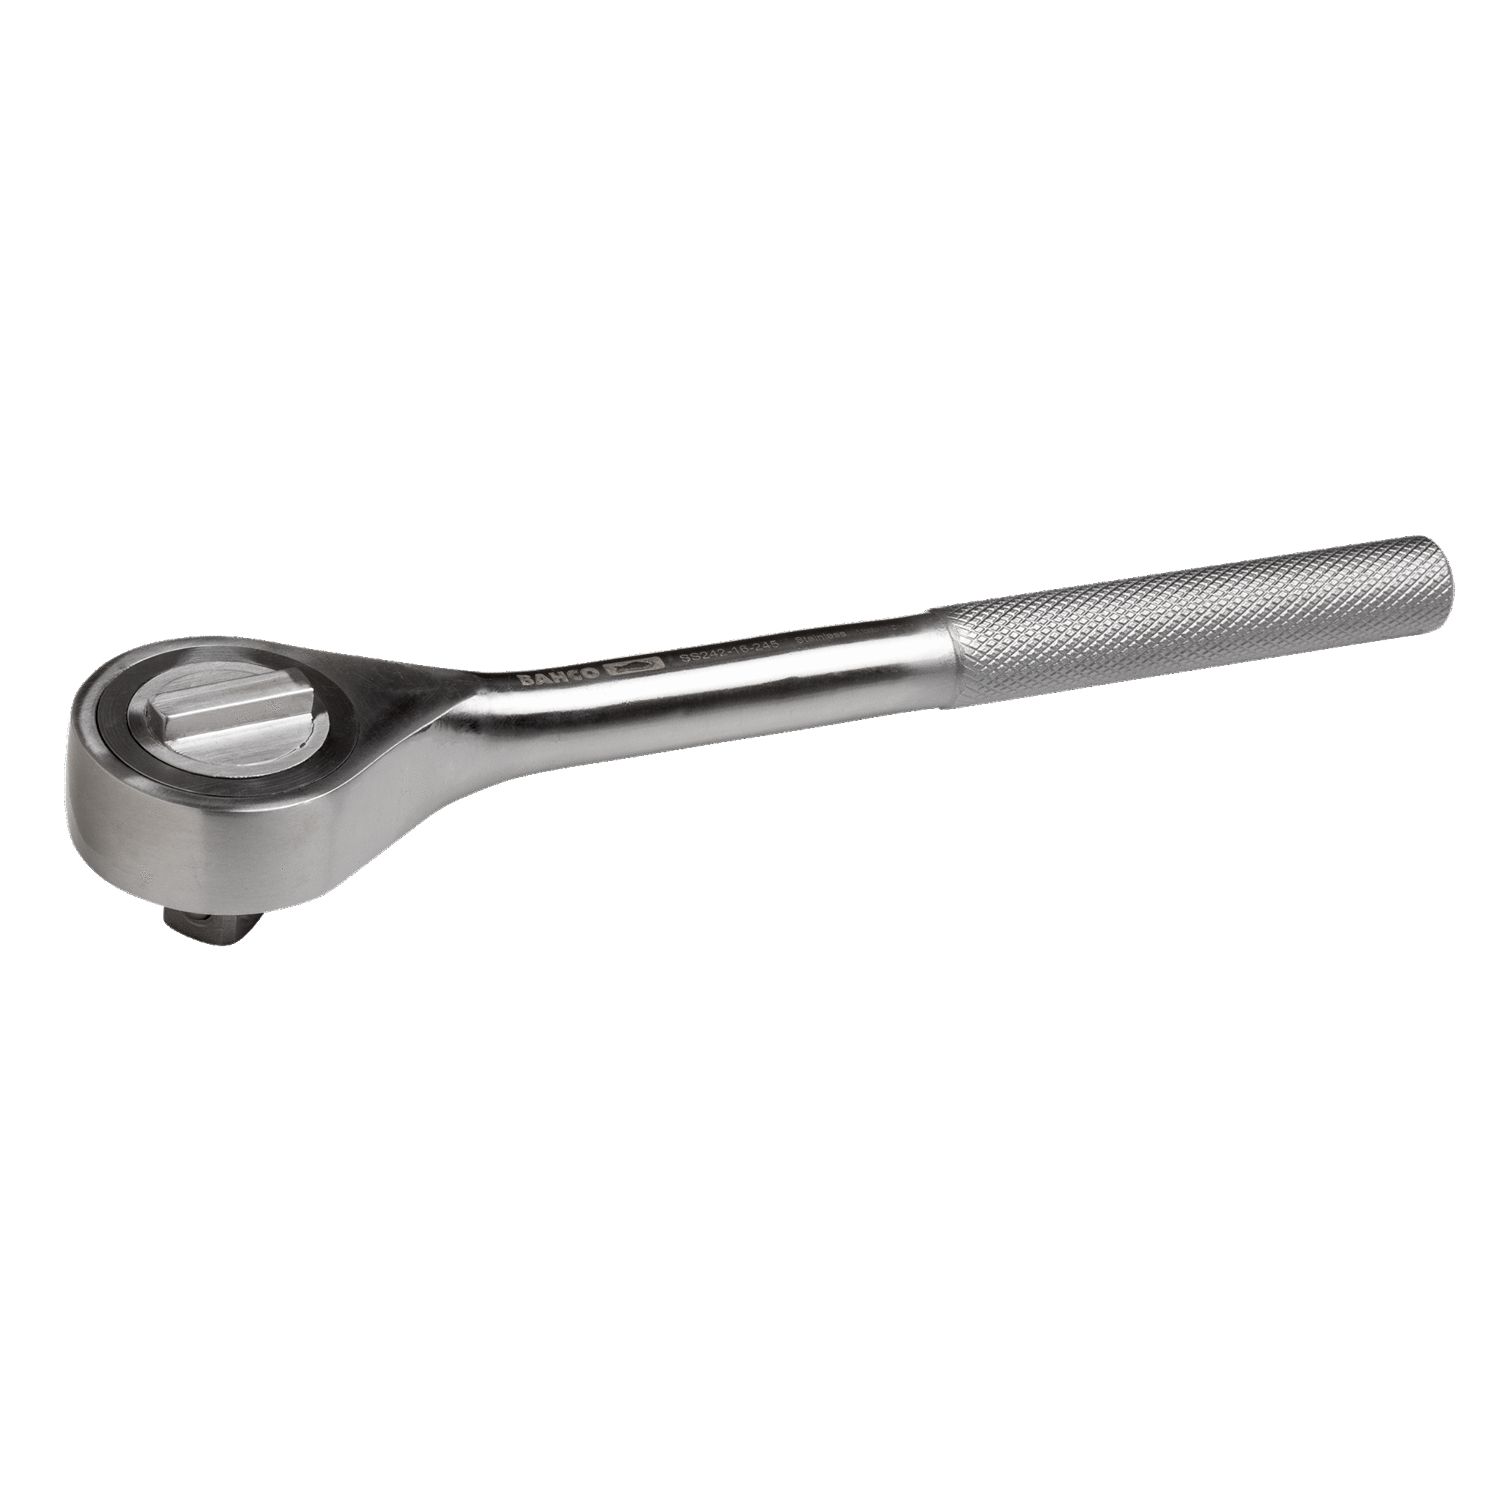 BAHCO SS242 Stainless Steel Reversible Ratchet (BAHCO Tools) - Premium Reversible Ratchet from BAHCO - Shop now at Yew Aik.